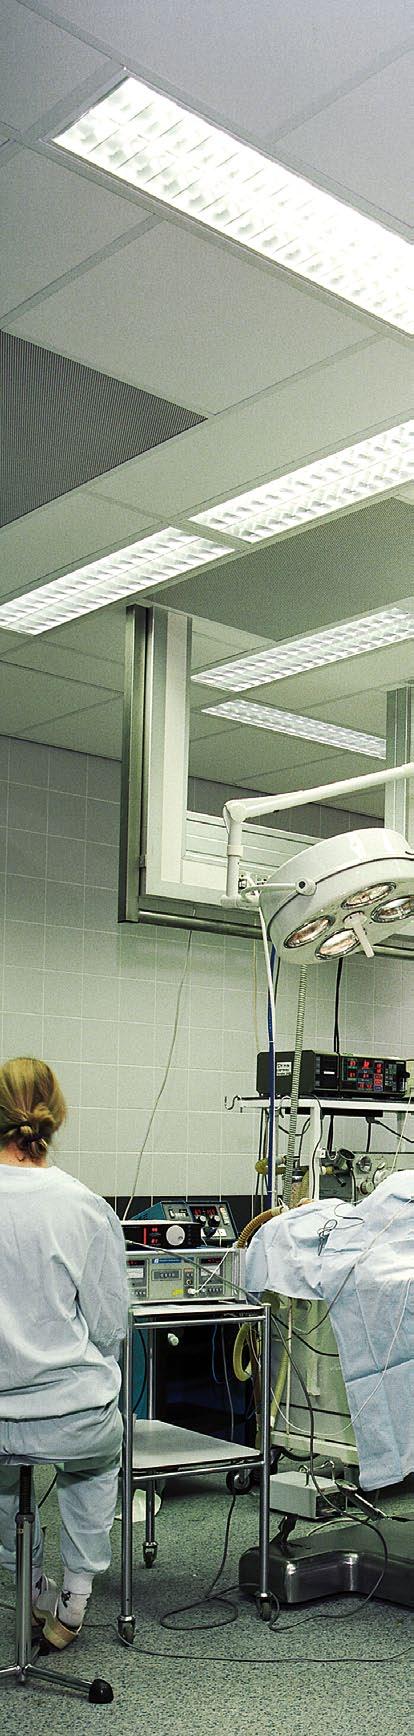 MediCare Air A ceiling solution specifically developed for use in pressurised healthcare areas MediCare Air is HTM 60 compliant in categories 2, 3, 4, 5 and 6.